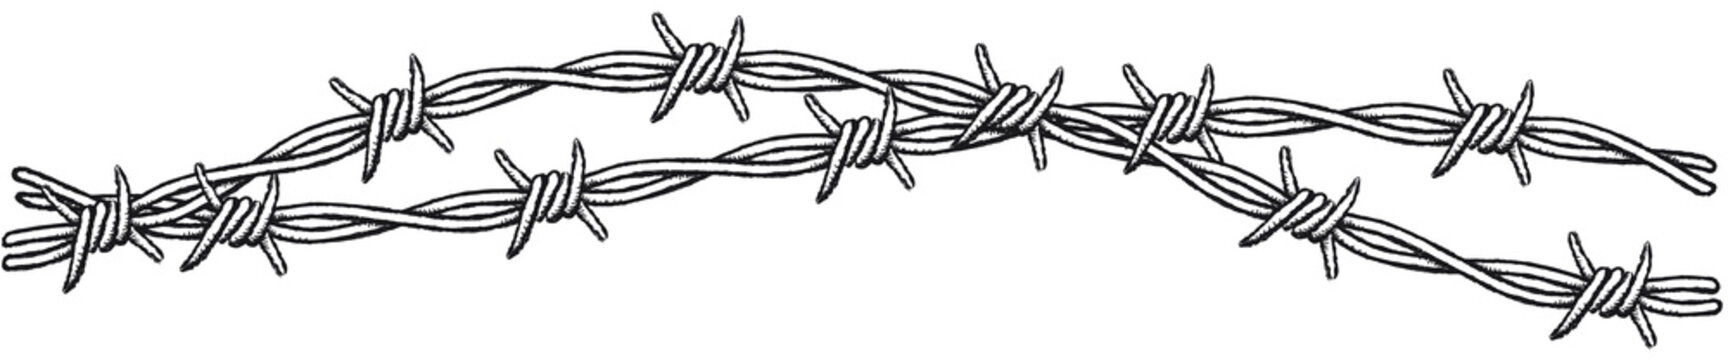 Barbed wire border, intertwined. Clip-art illustration of a border with two interlocking barbed wires on a white background.